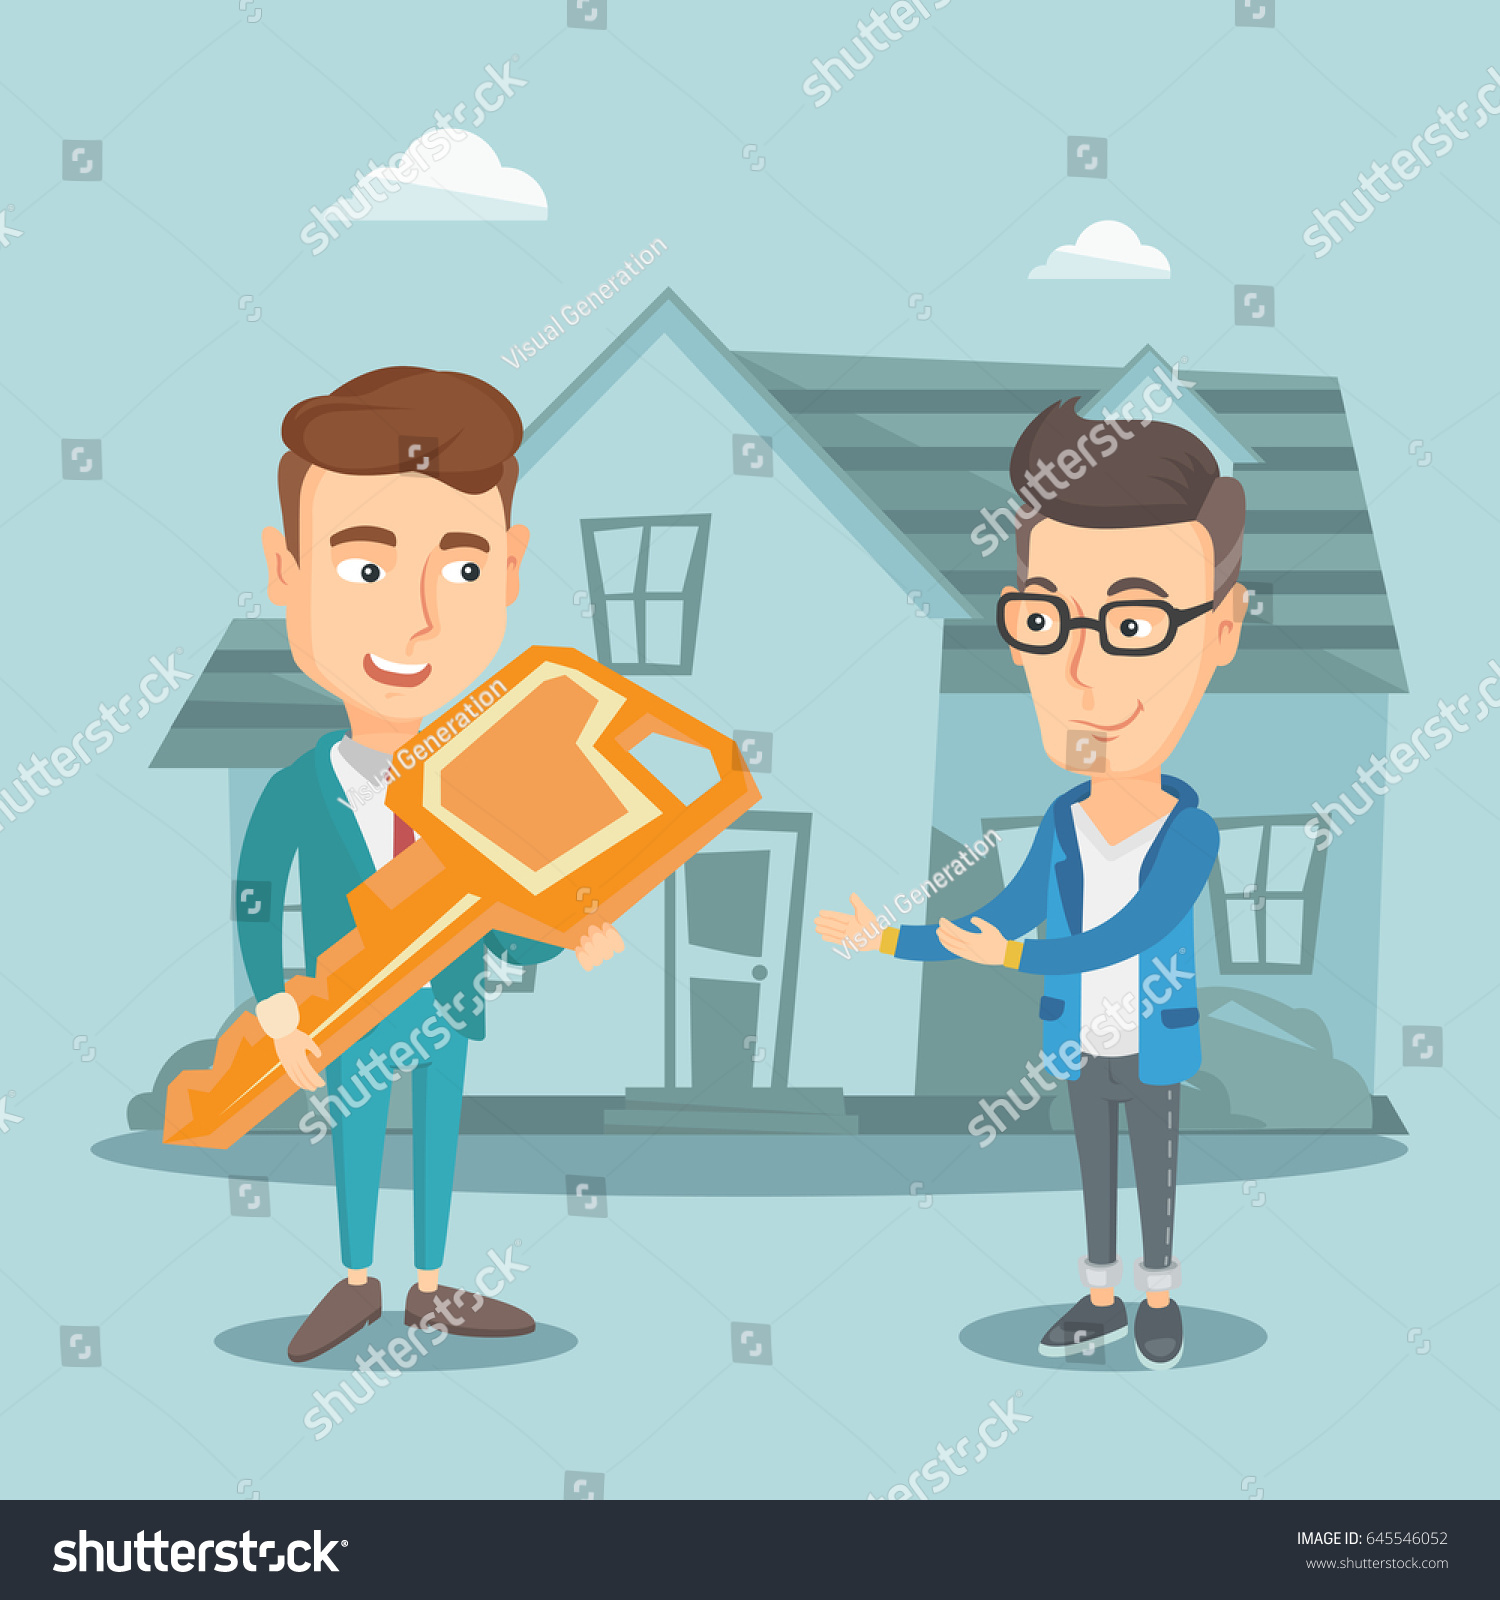 Friendly real estate agent giving key to a new owner of a house. Real estate agent passing house keys to cheerful client. Happy man buying a new house. Vector flat design illustration. Square layout.